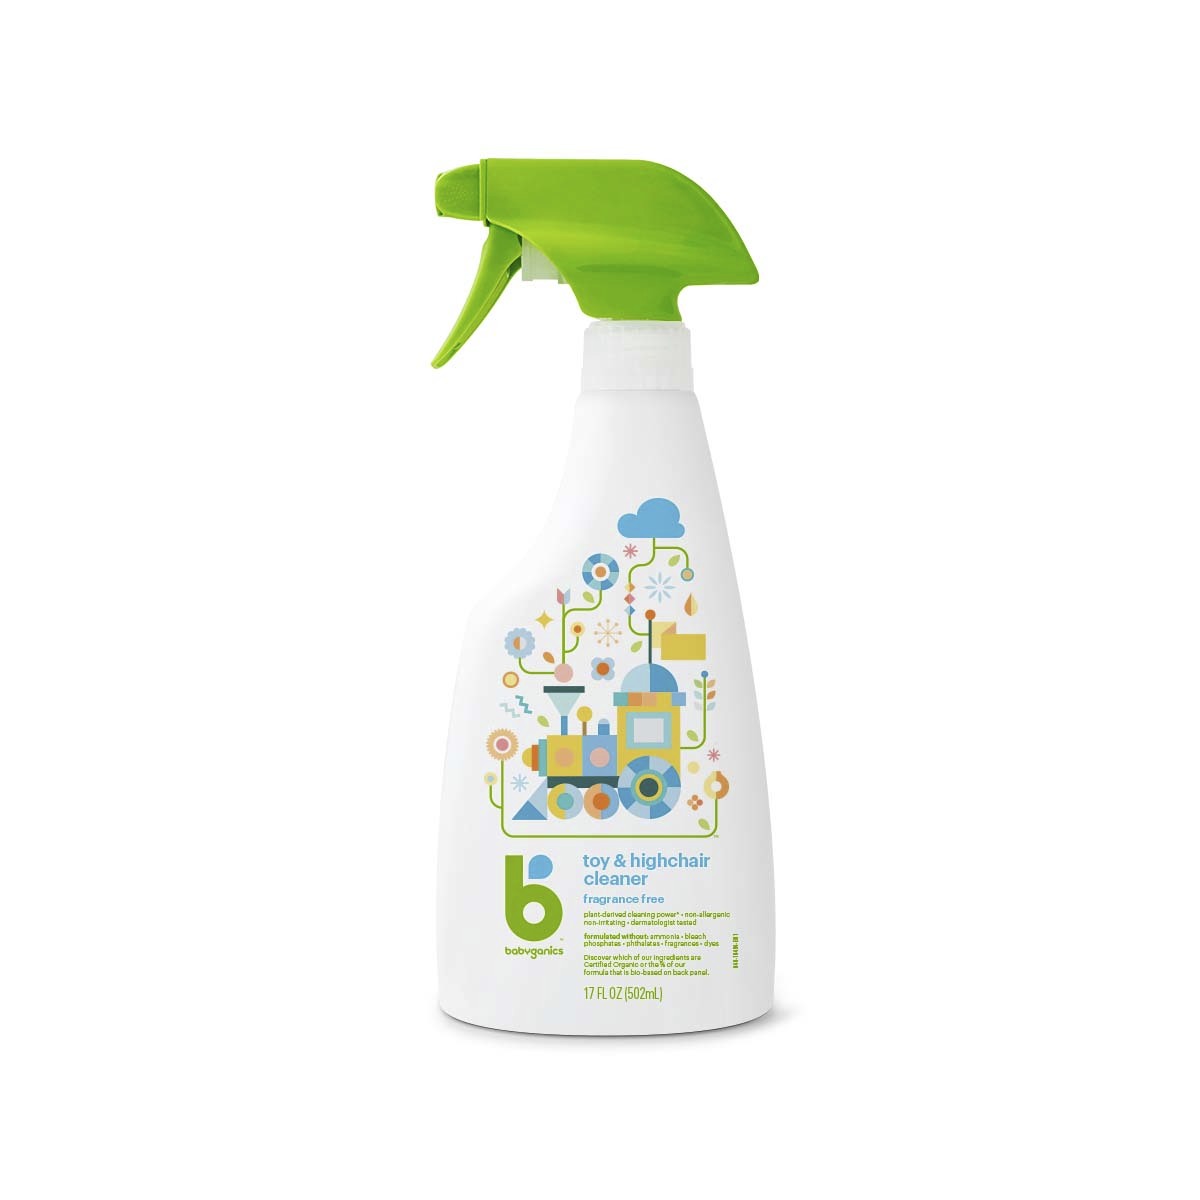 toy & highchair cleaner, fragrance free